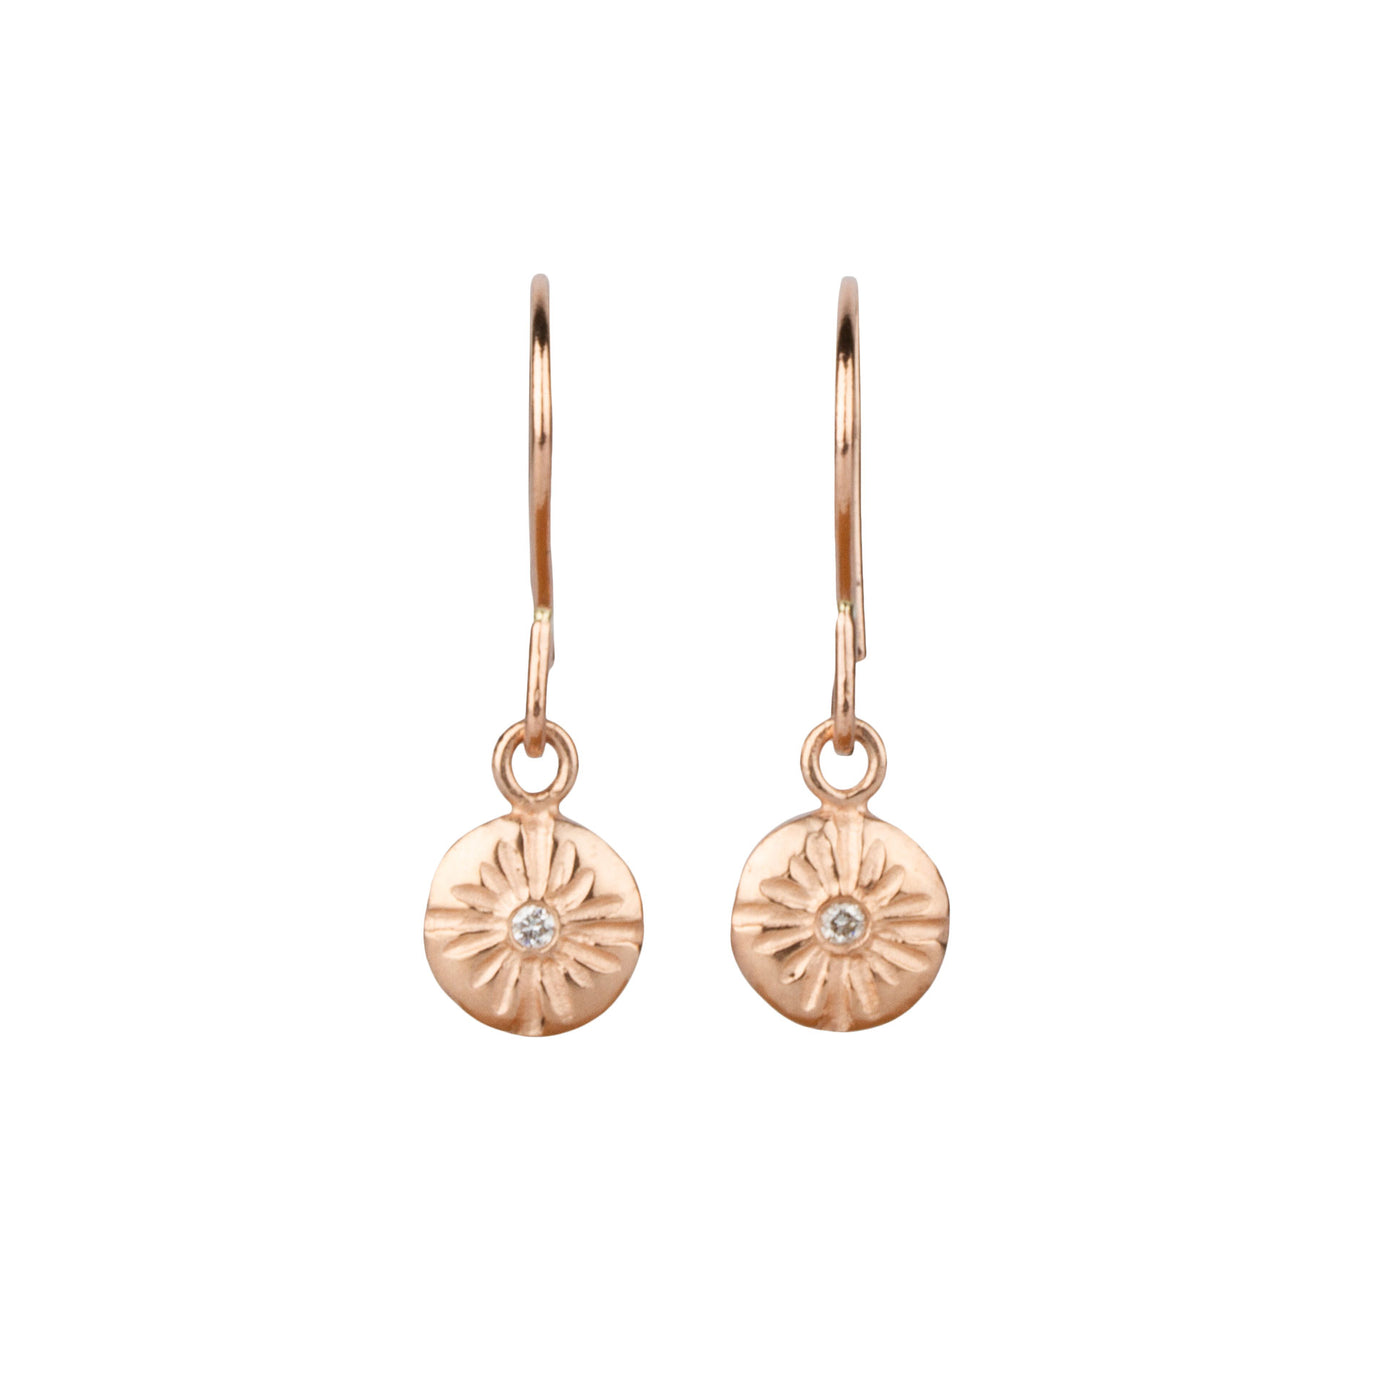 Rose Gold Sunburst Lucia Earrings with Diamonds by Corey Egan on a white background